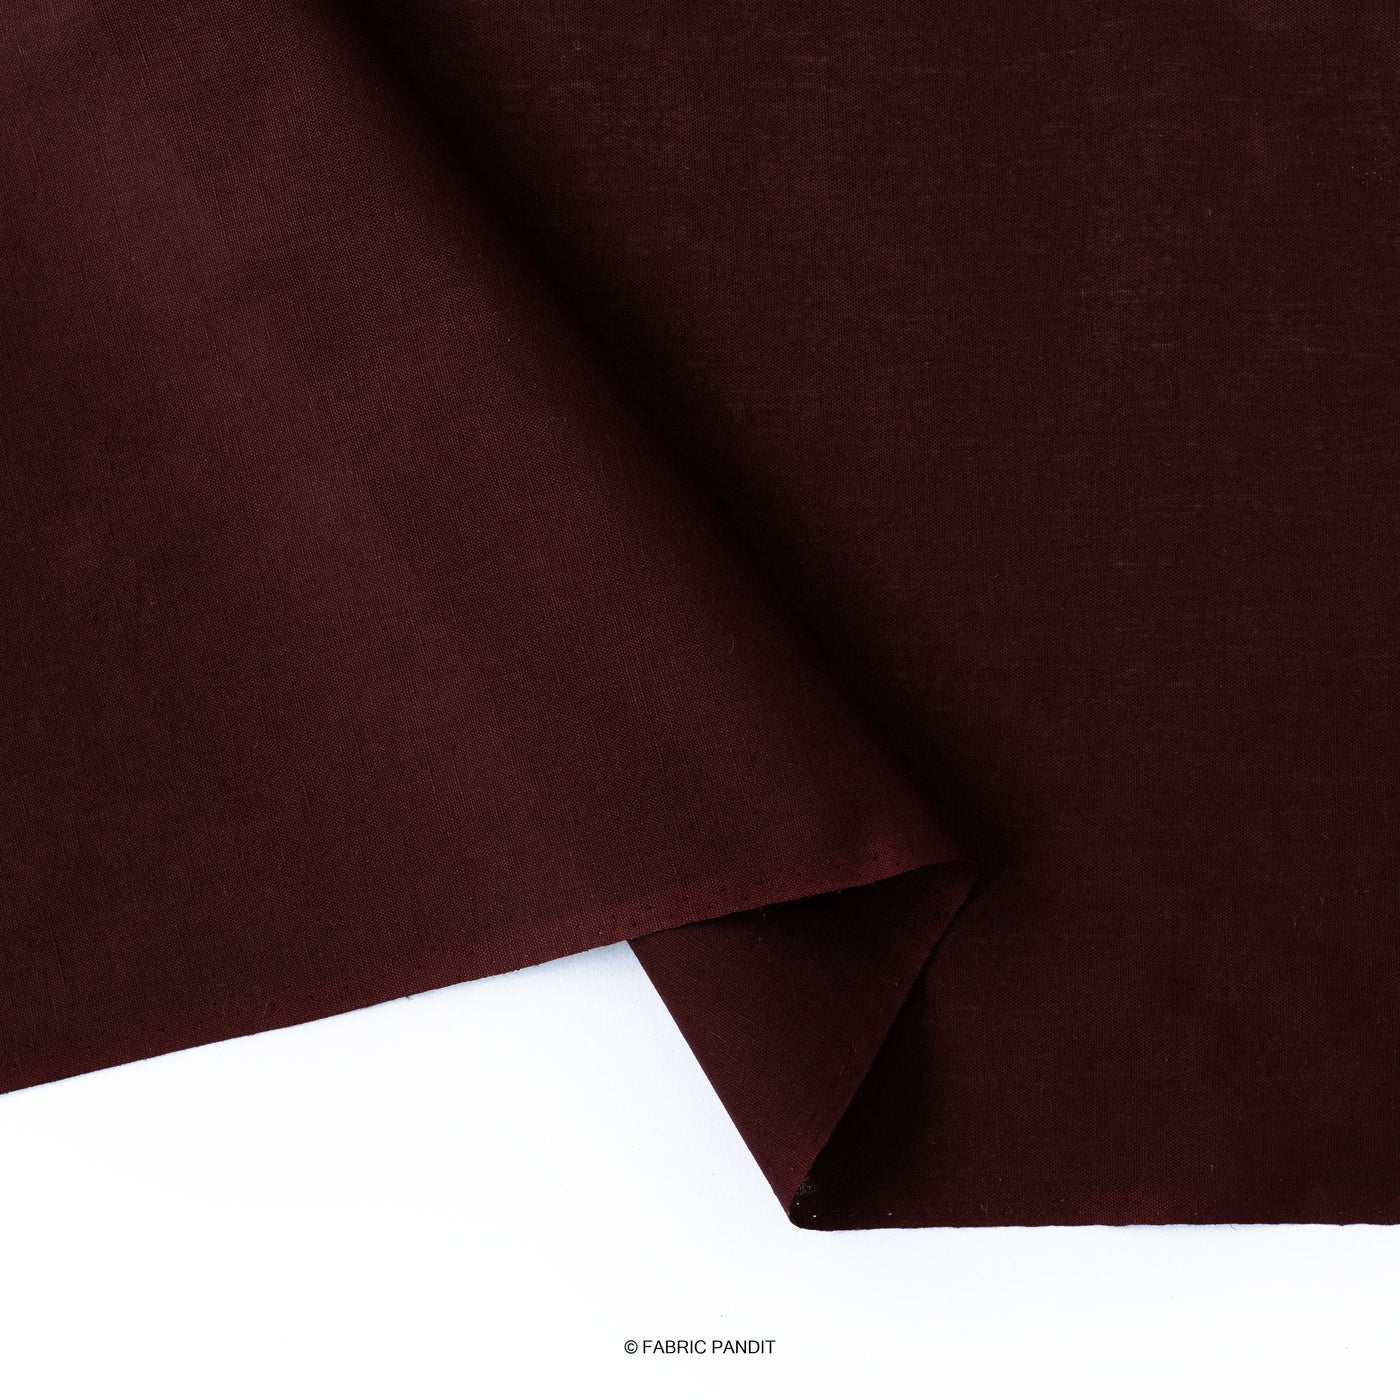 Fabric Pandit Fabric Seal Brown Pure Cotton Linen Fabric